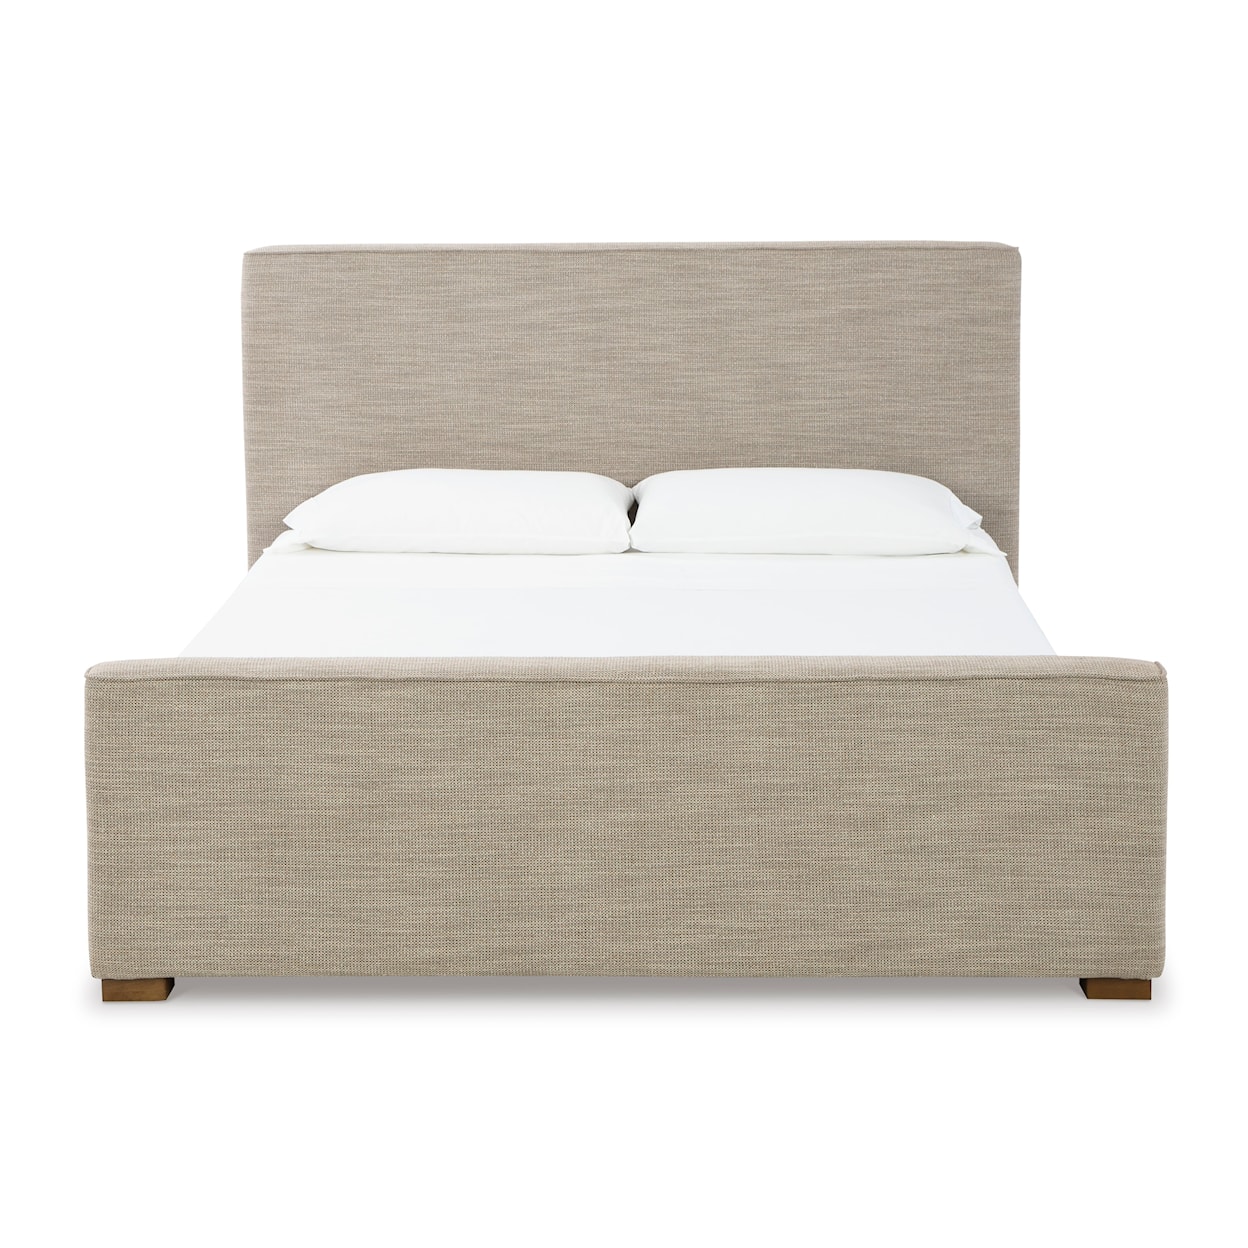 Signature Dakmore Queen Upholstered Bed